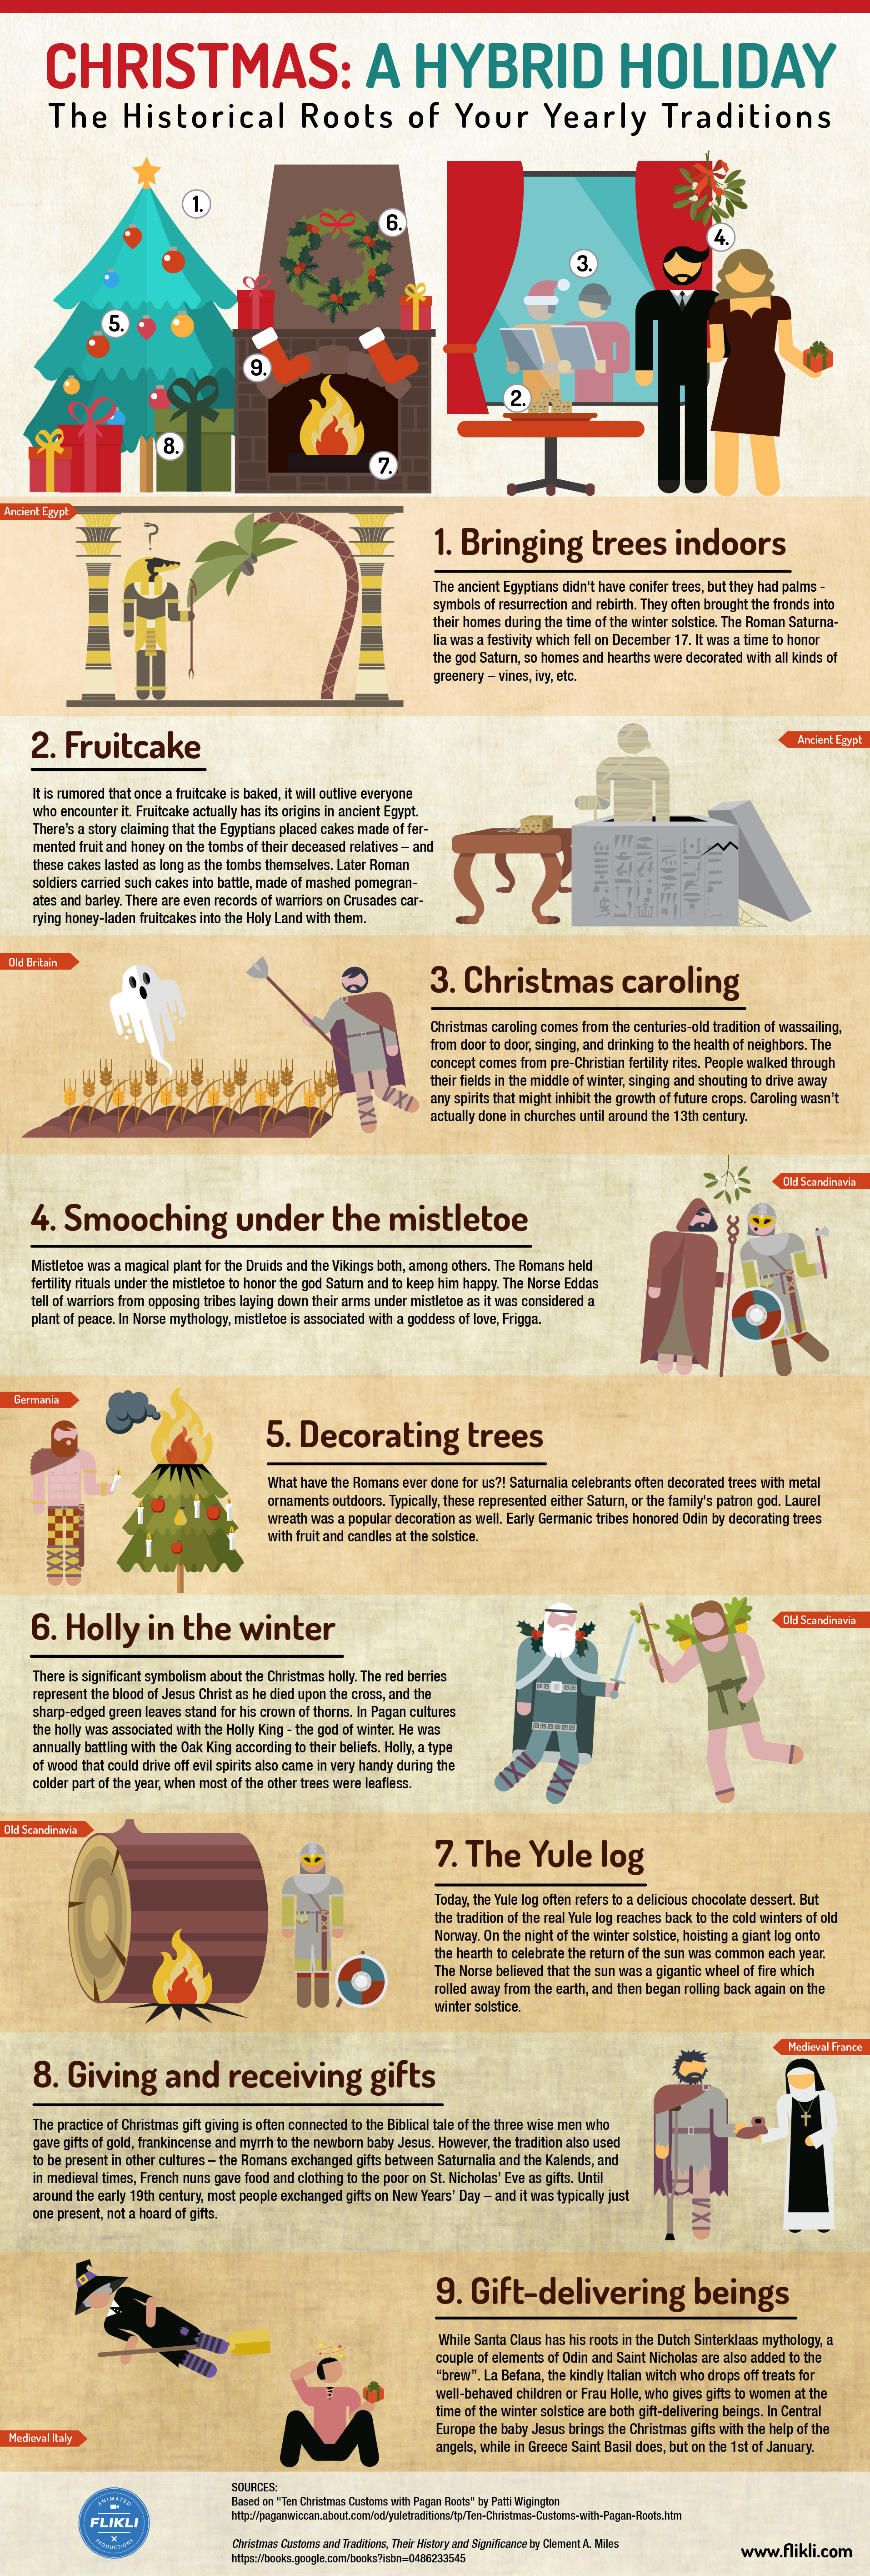 9 Christmas Traditions and Their Historical Roots